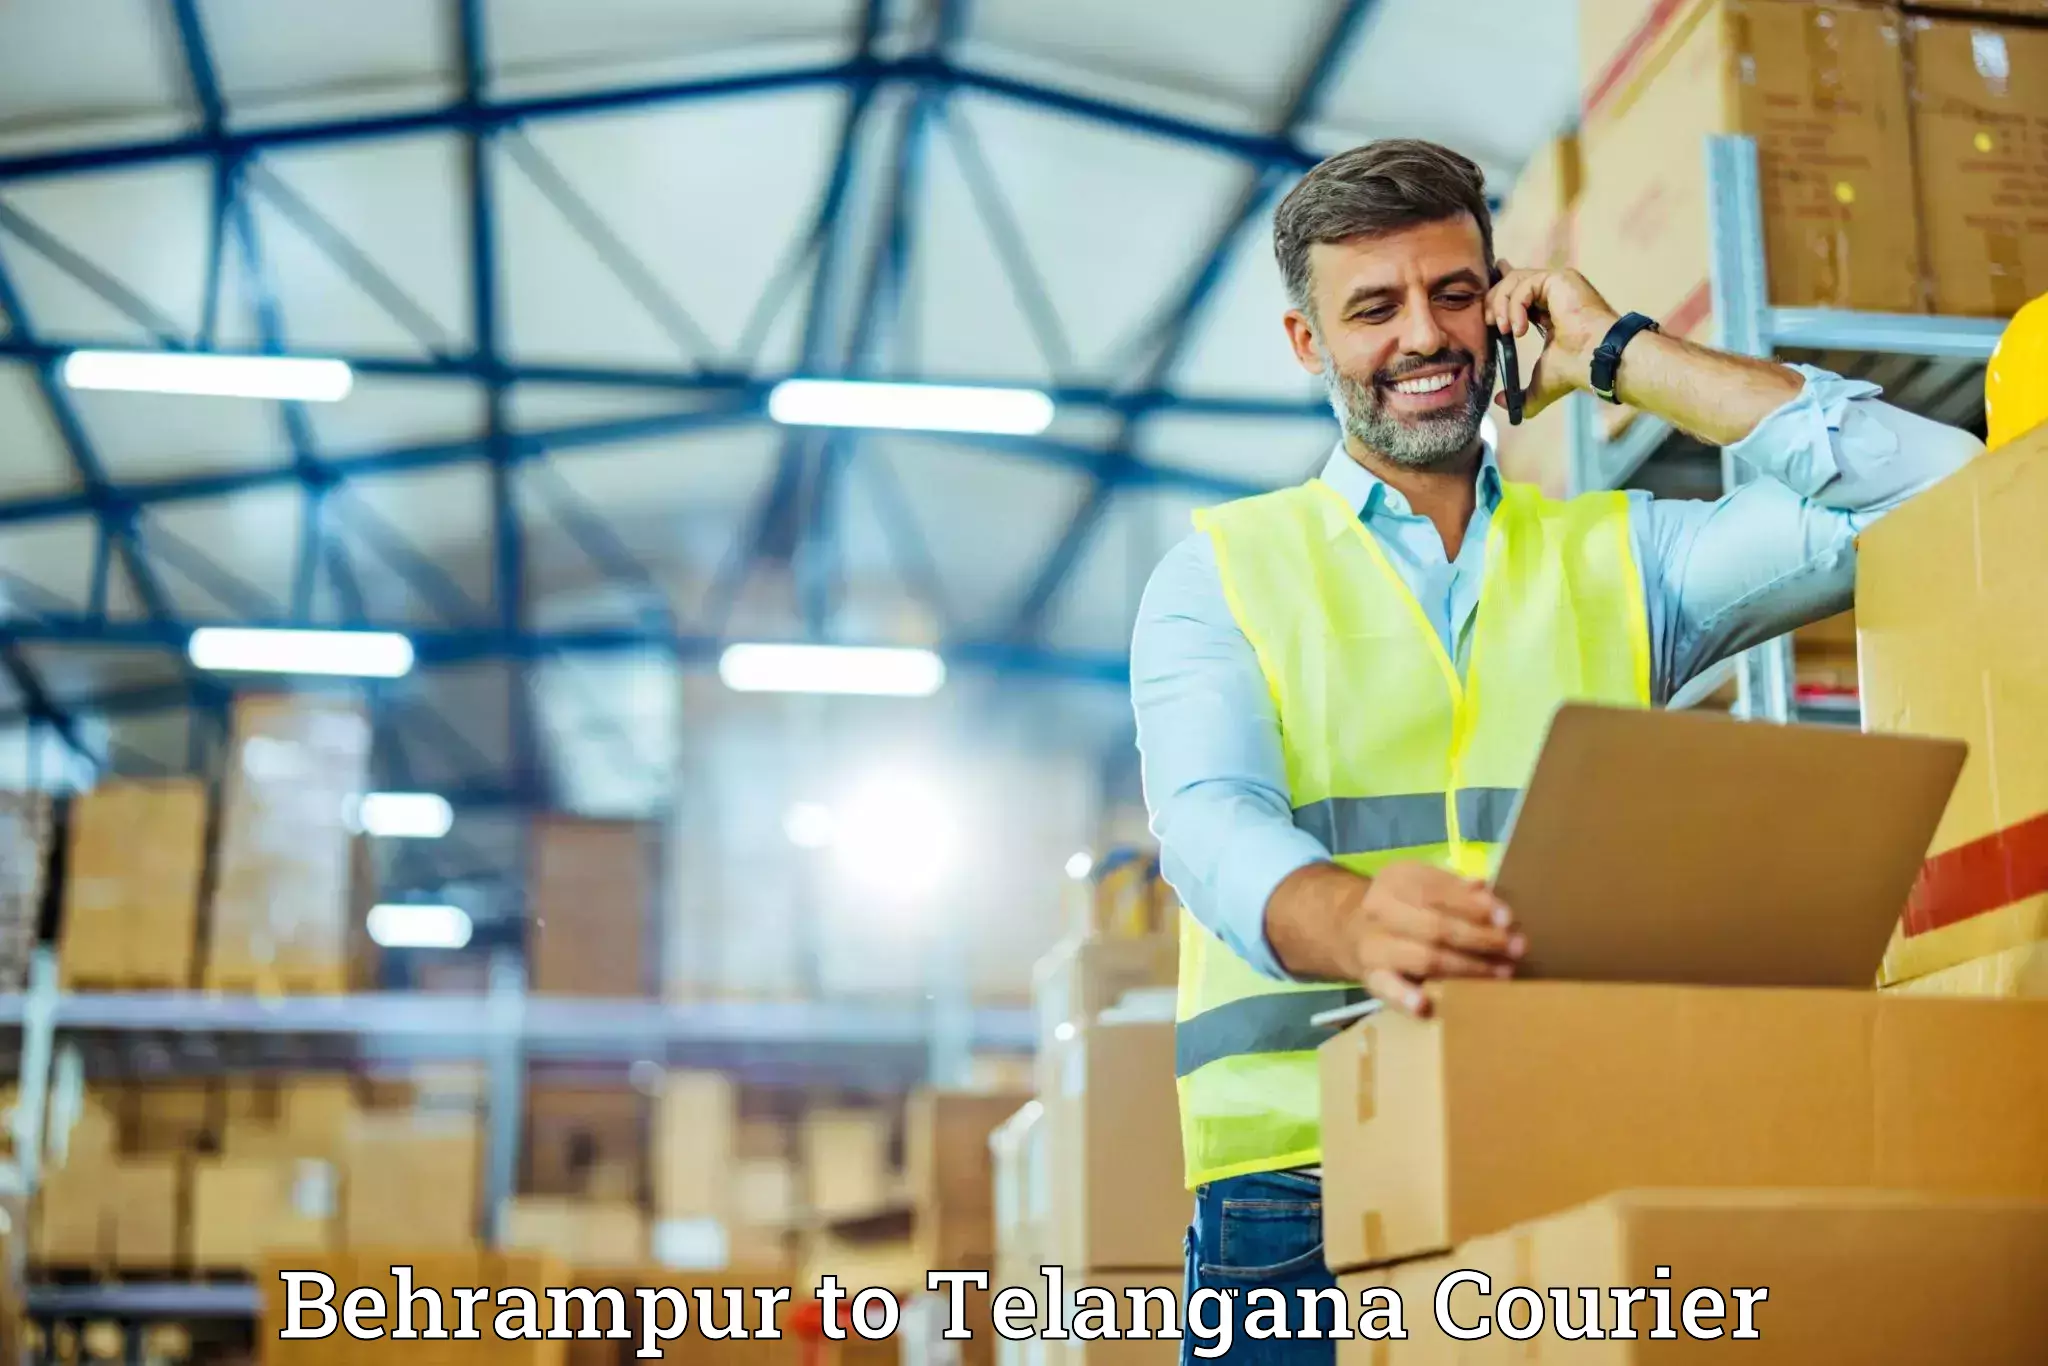 Furniture transport service Behrampur to Moinabad